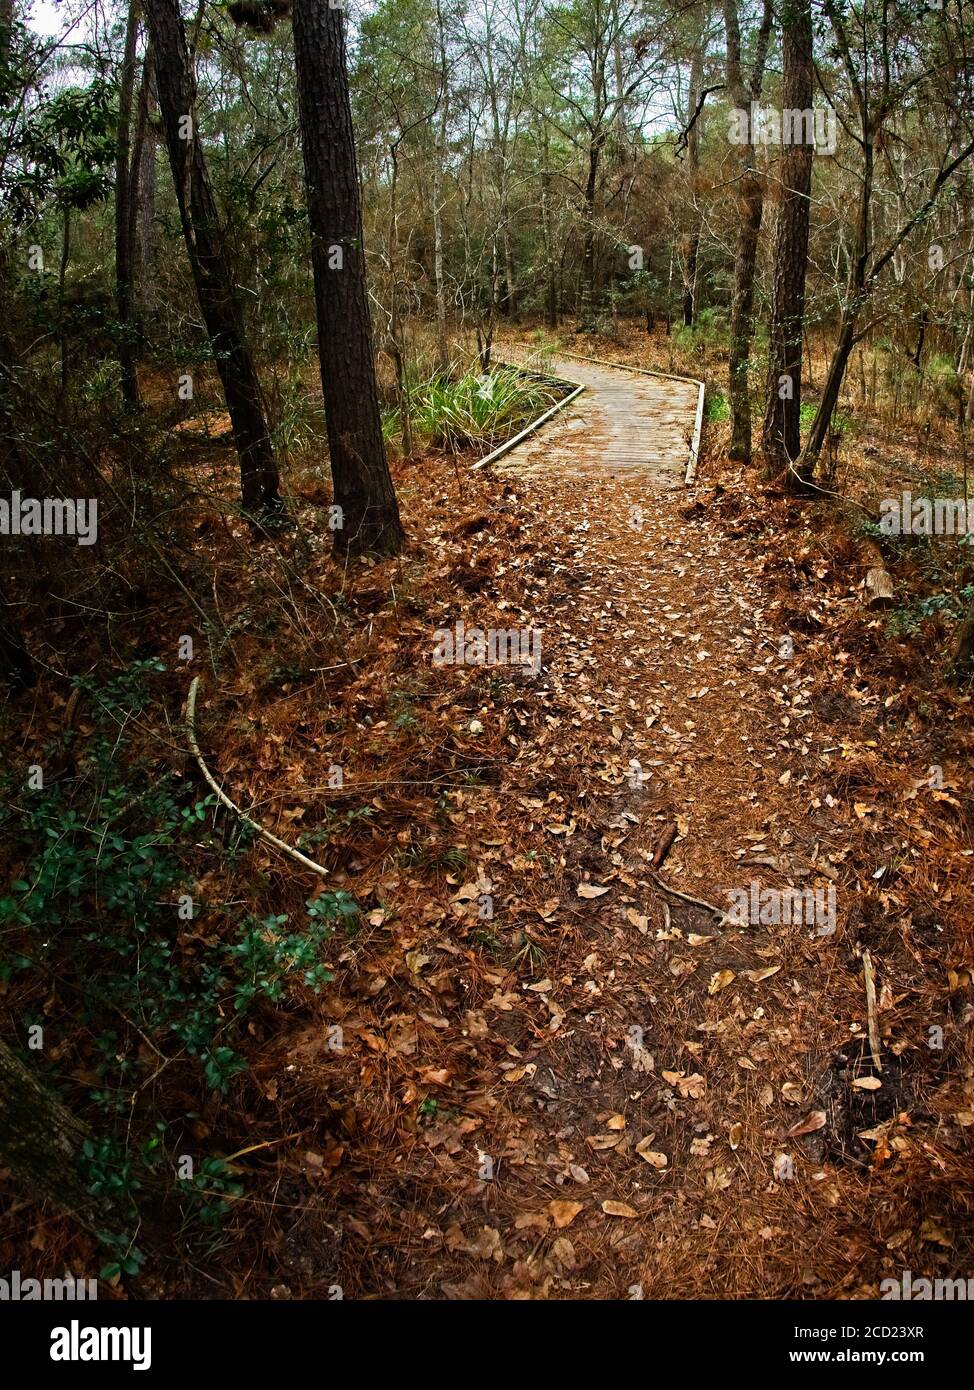 The Woodlands TX USA - 01-09-2020 - Trail to Wooden Bridge in Woods Stockfoto